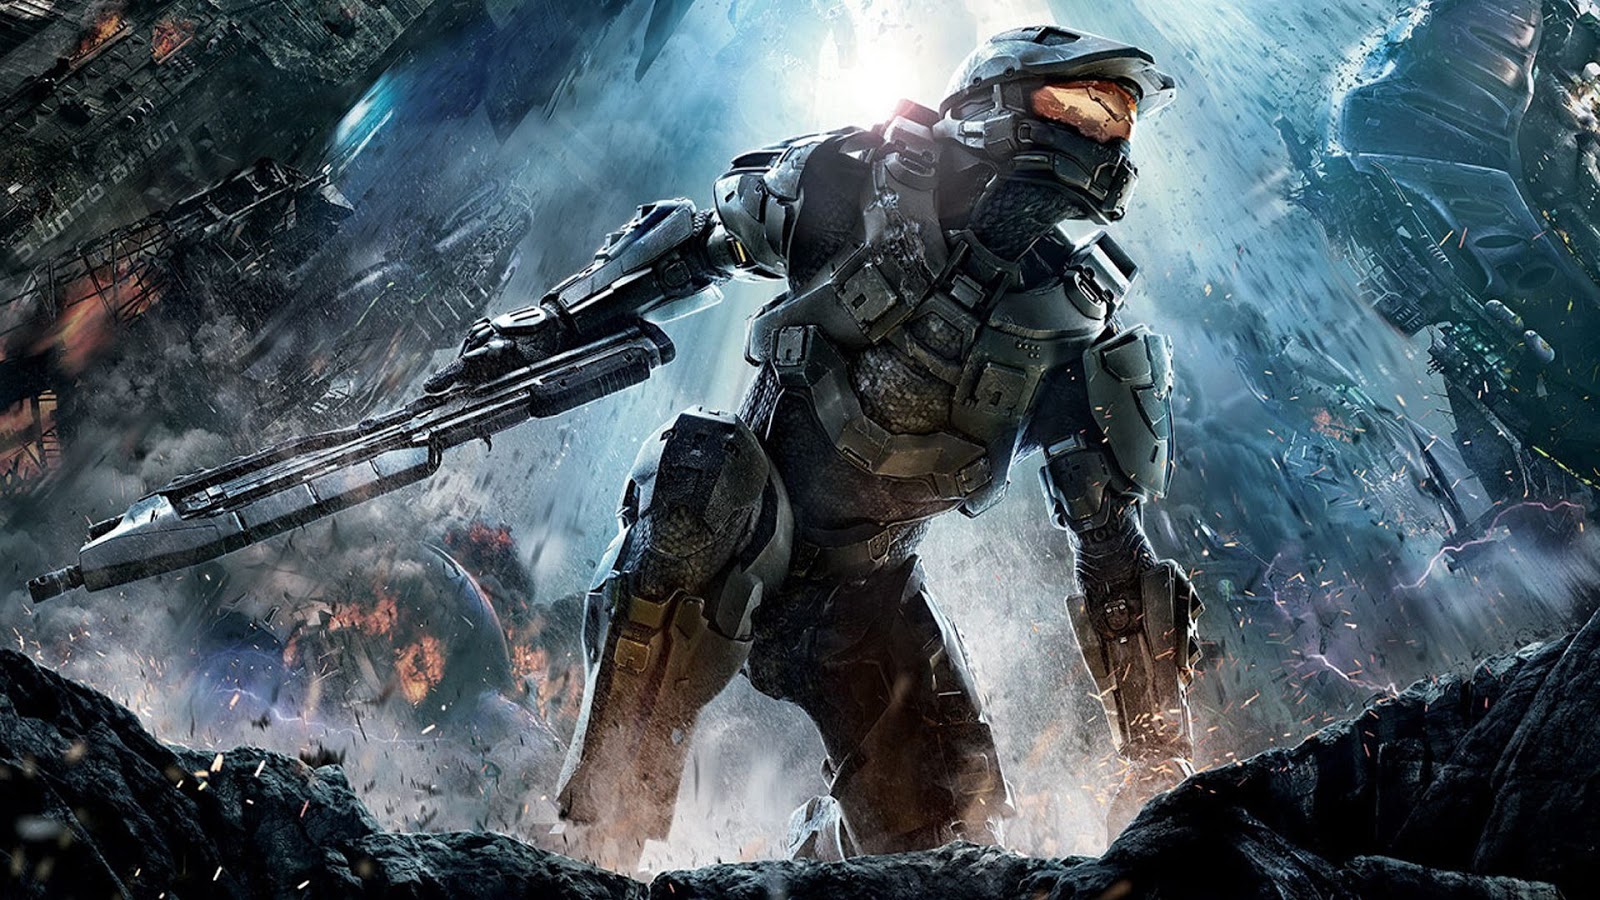 Halo Spartan Assault Now Available For Windows Devices